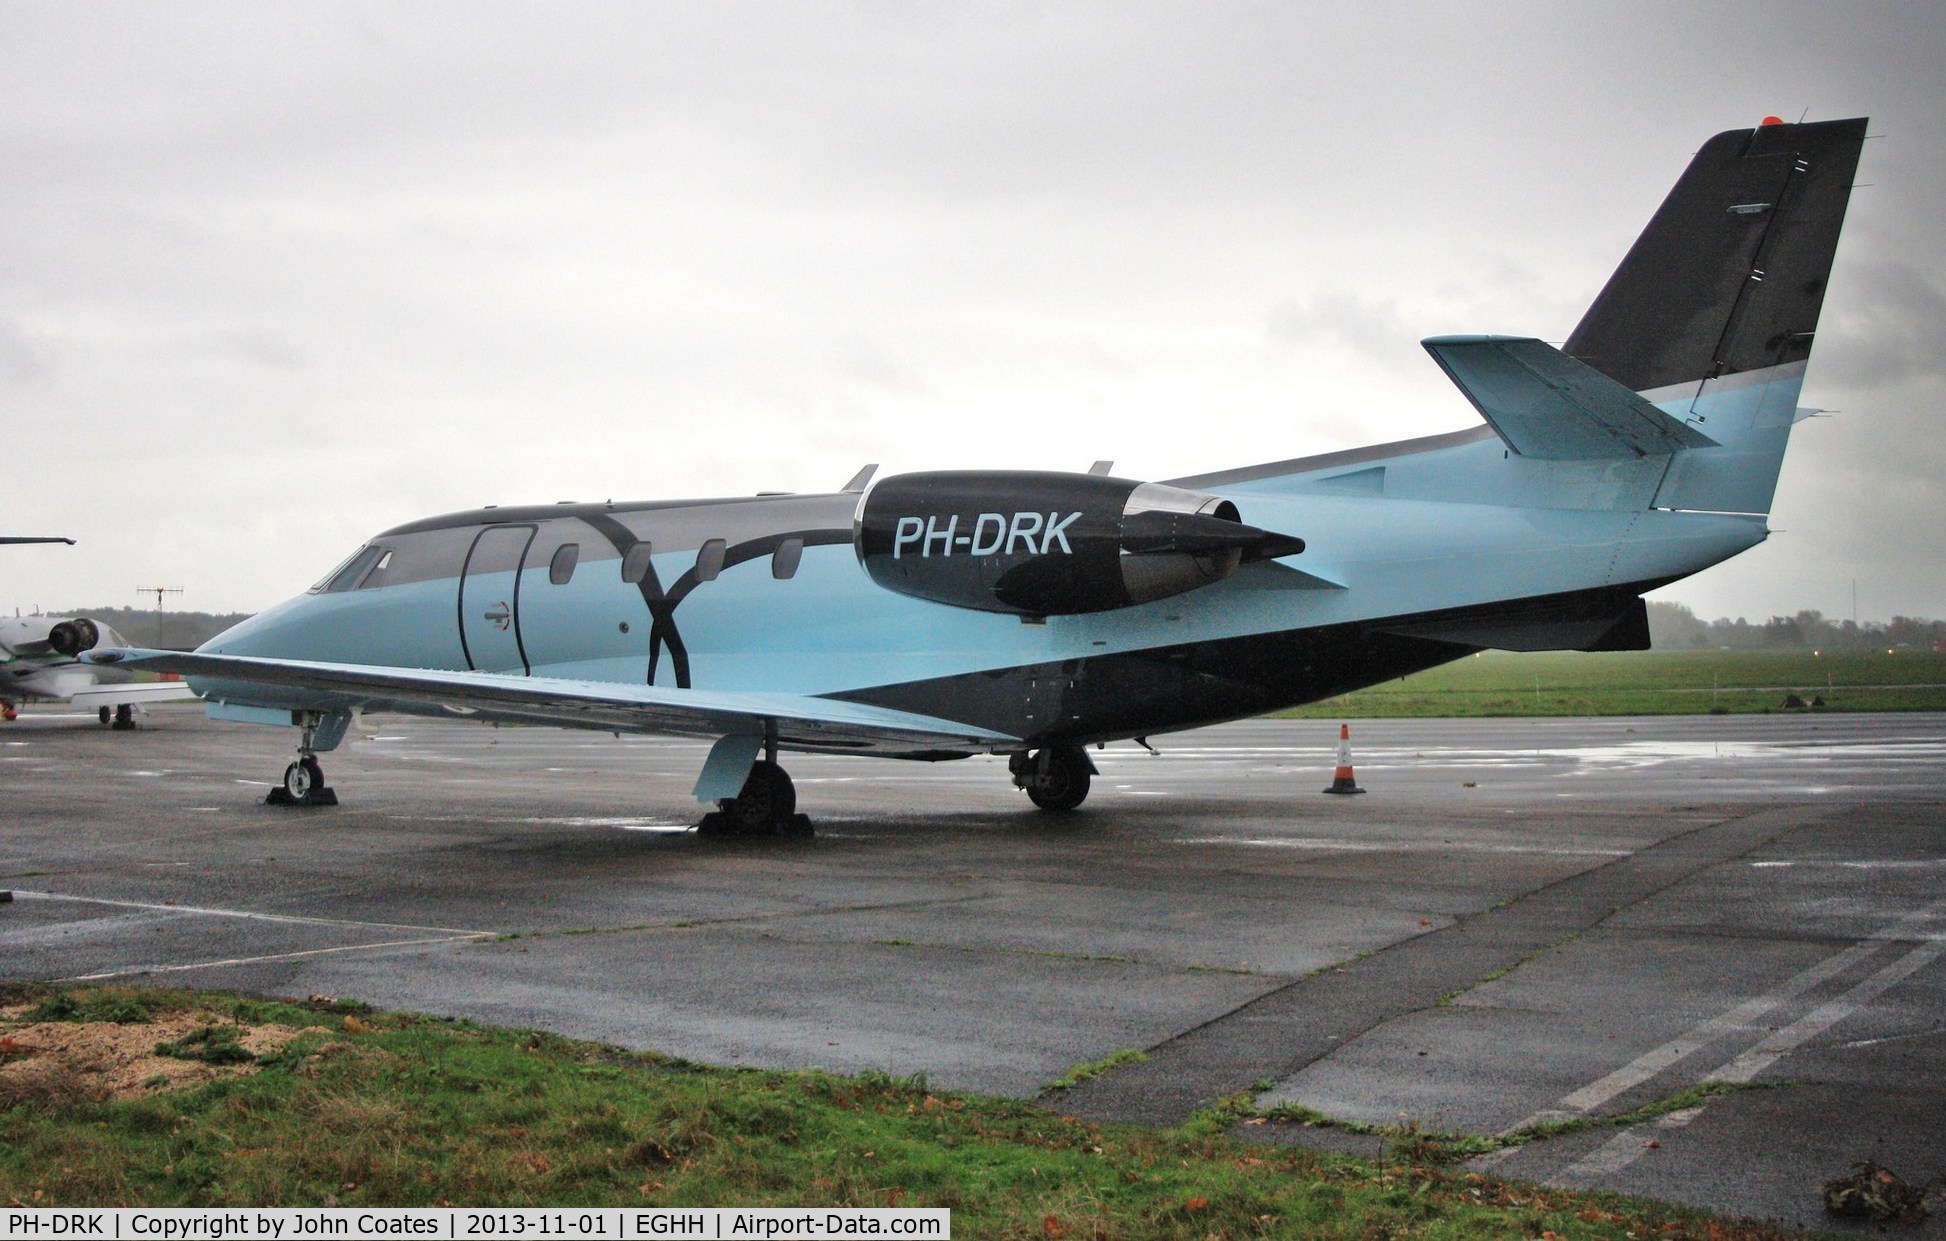 PH-DRK, 2002 Cessna 560XL Citation C/N 560-5258, A splash of colour at Sigs on a very grey day